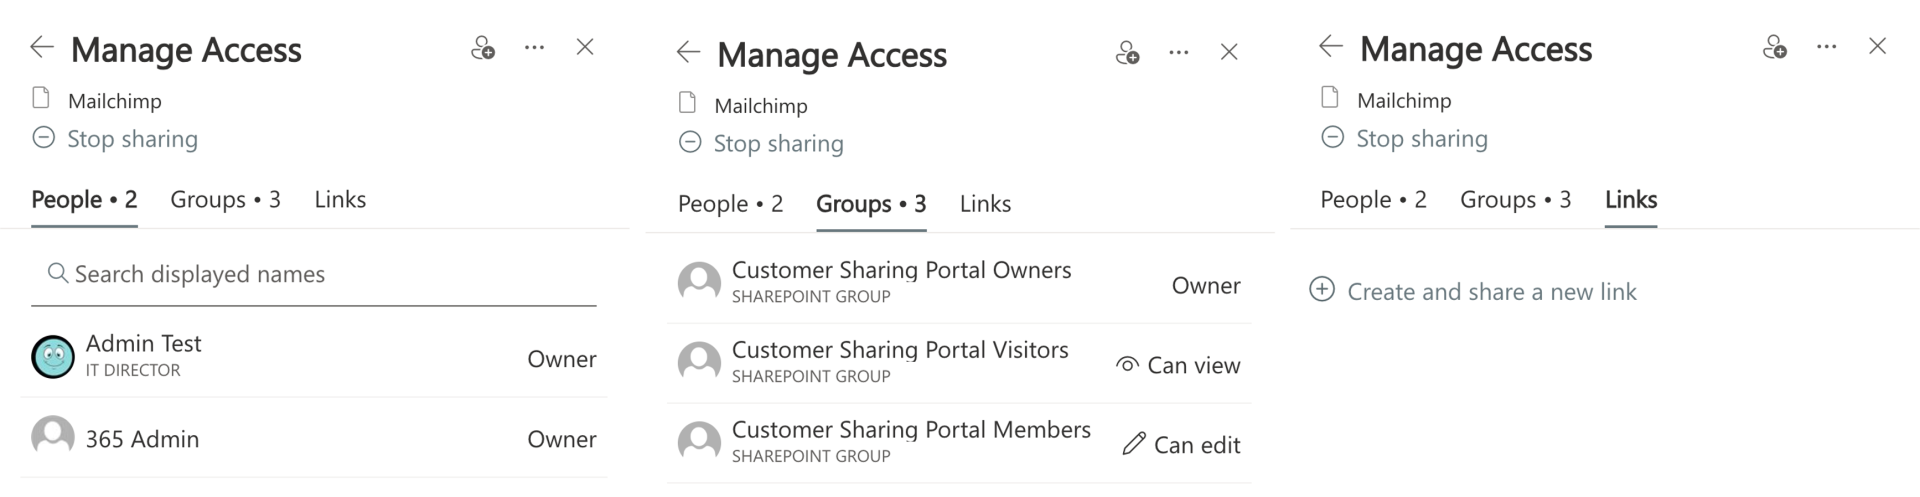 There are three access options you could be able to manage: People, Groups and Links